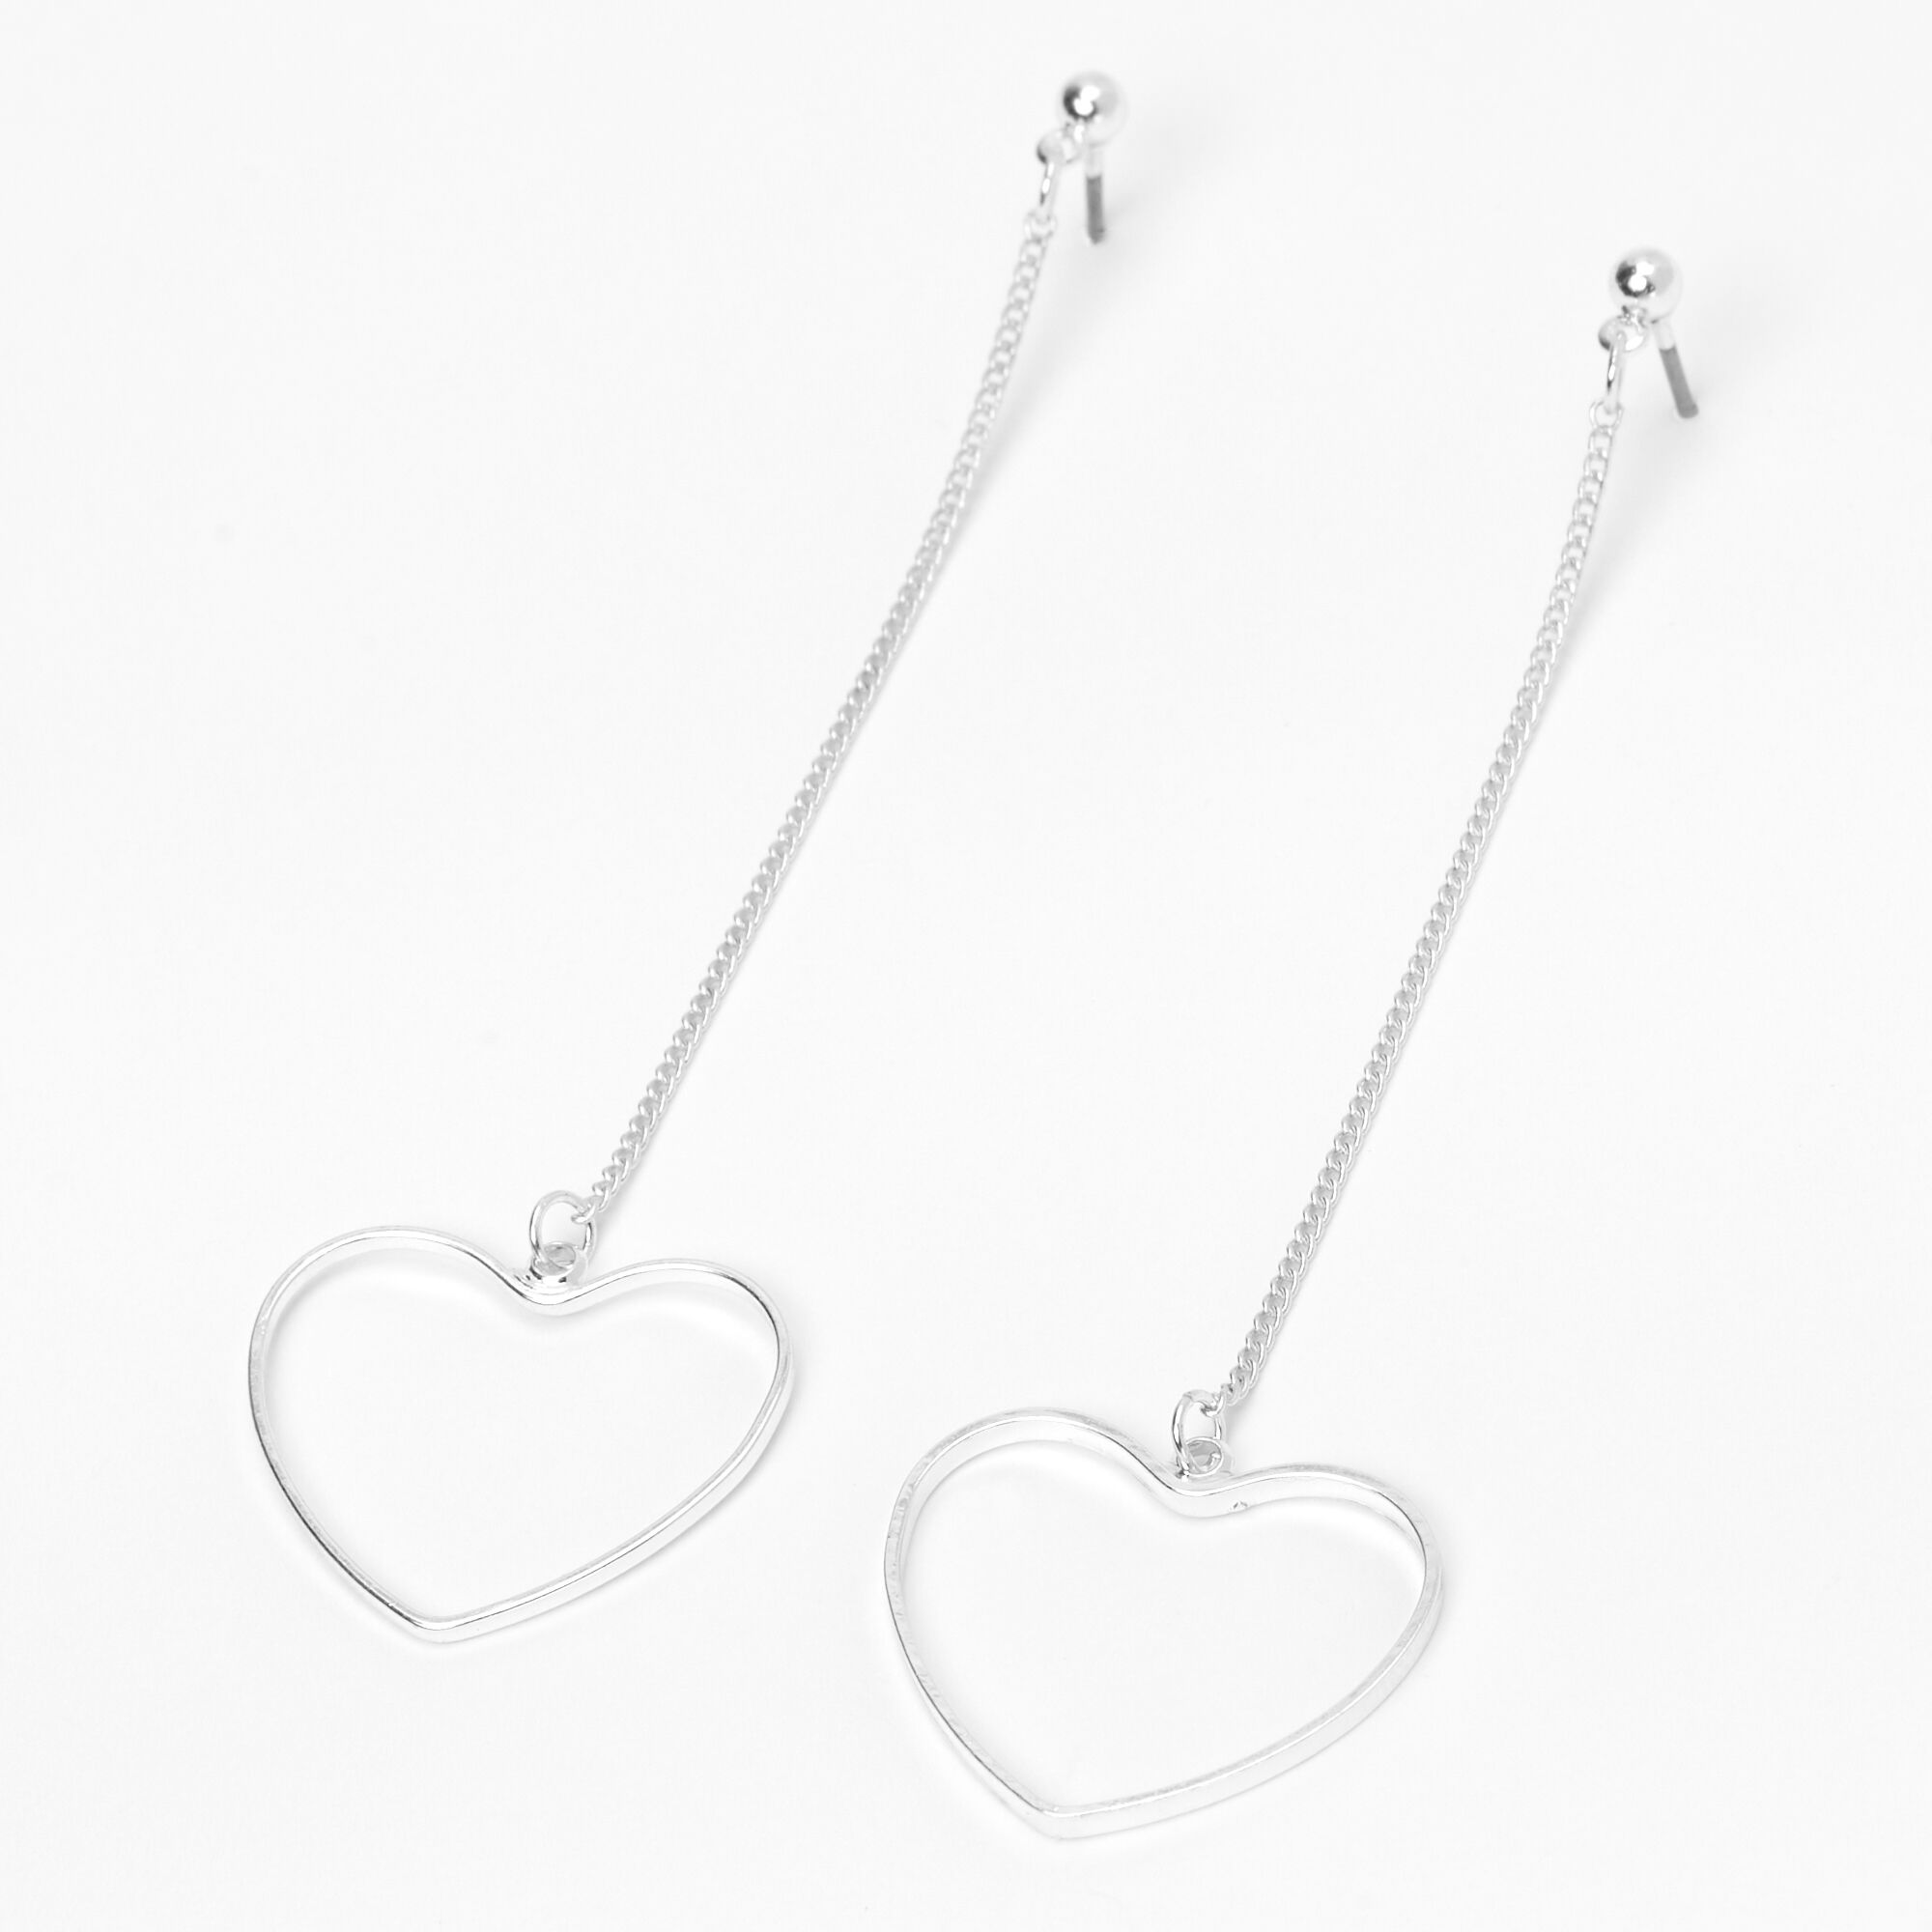 CLIP ON Big Heart Earrings Dangle with Brushed Silver Tone Finish Drop